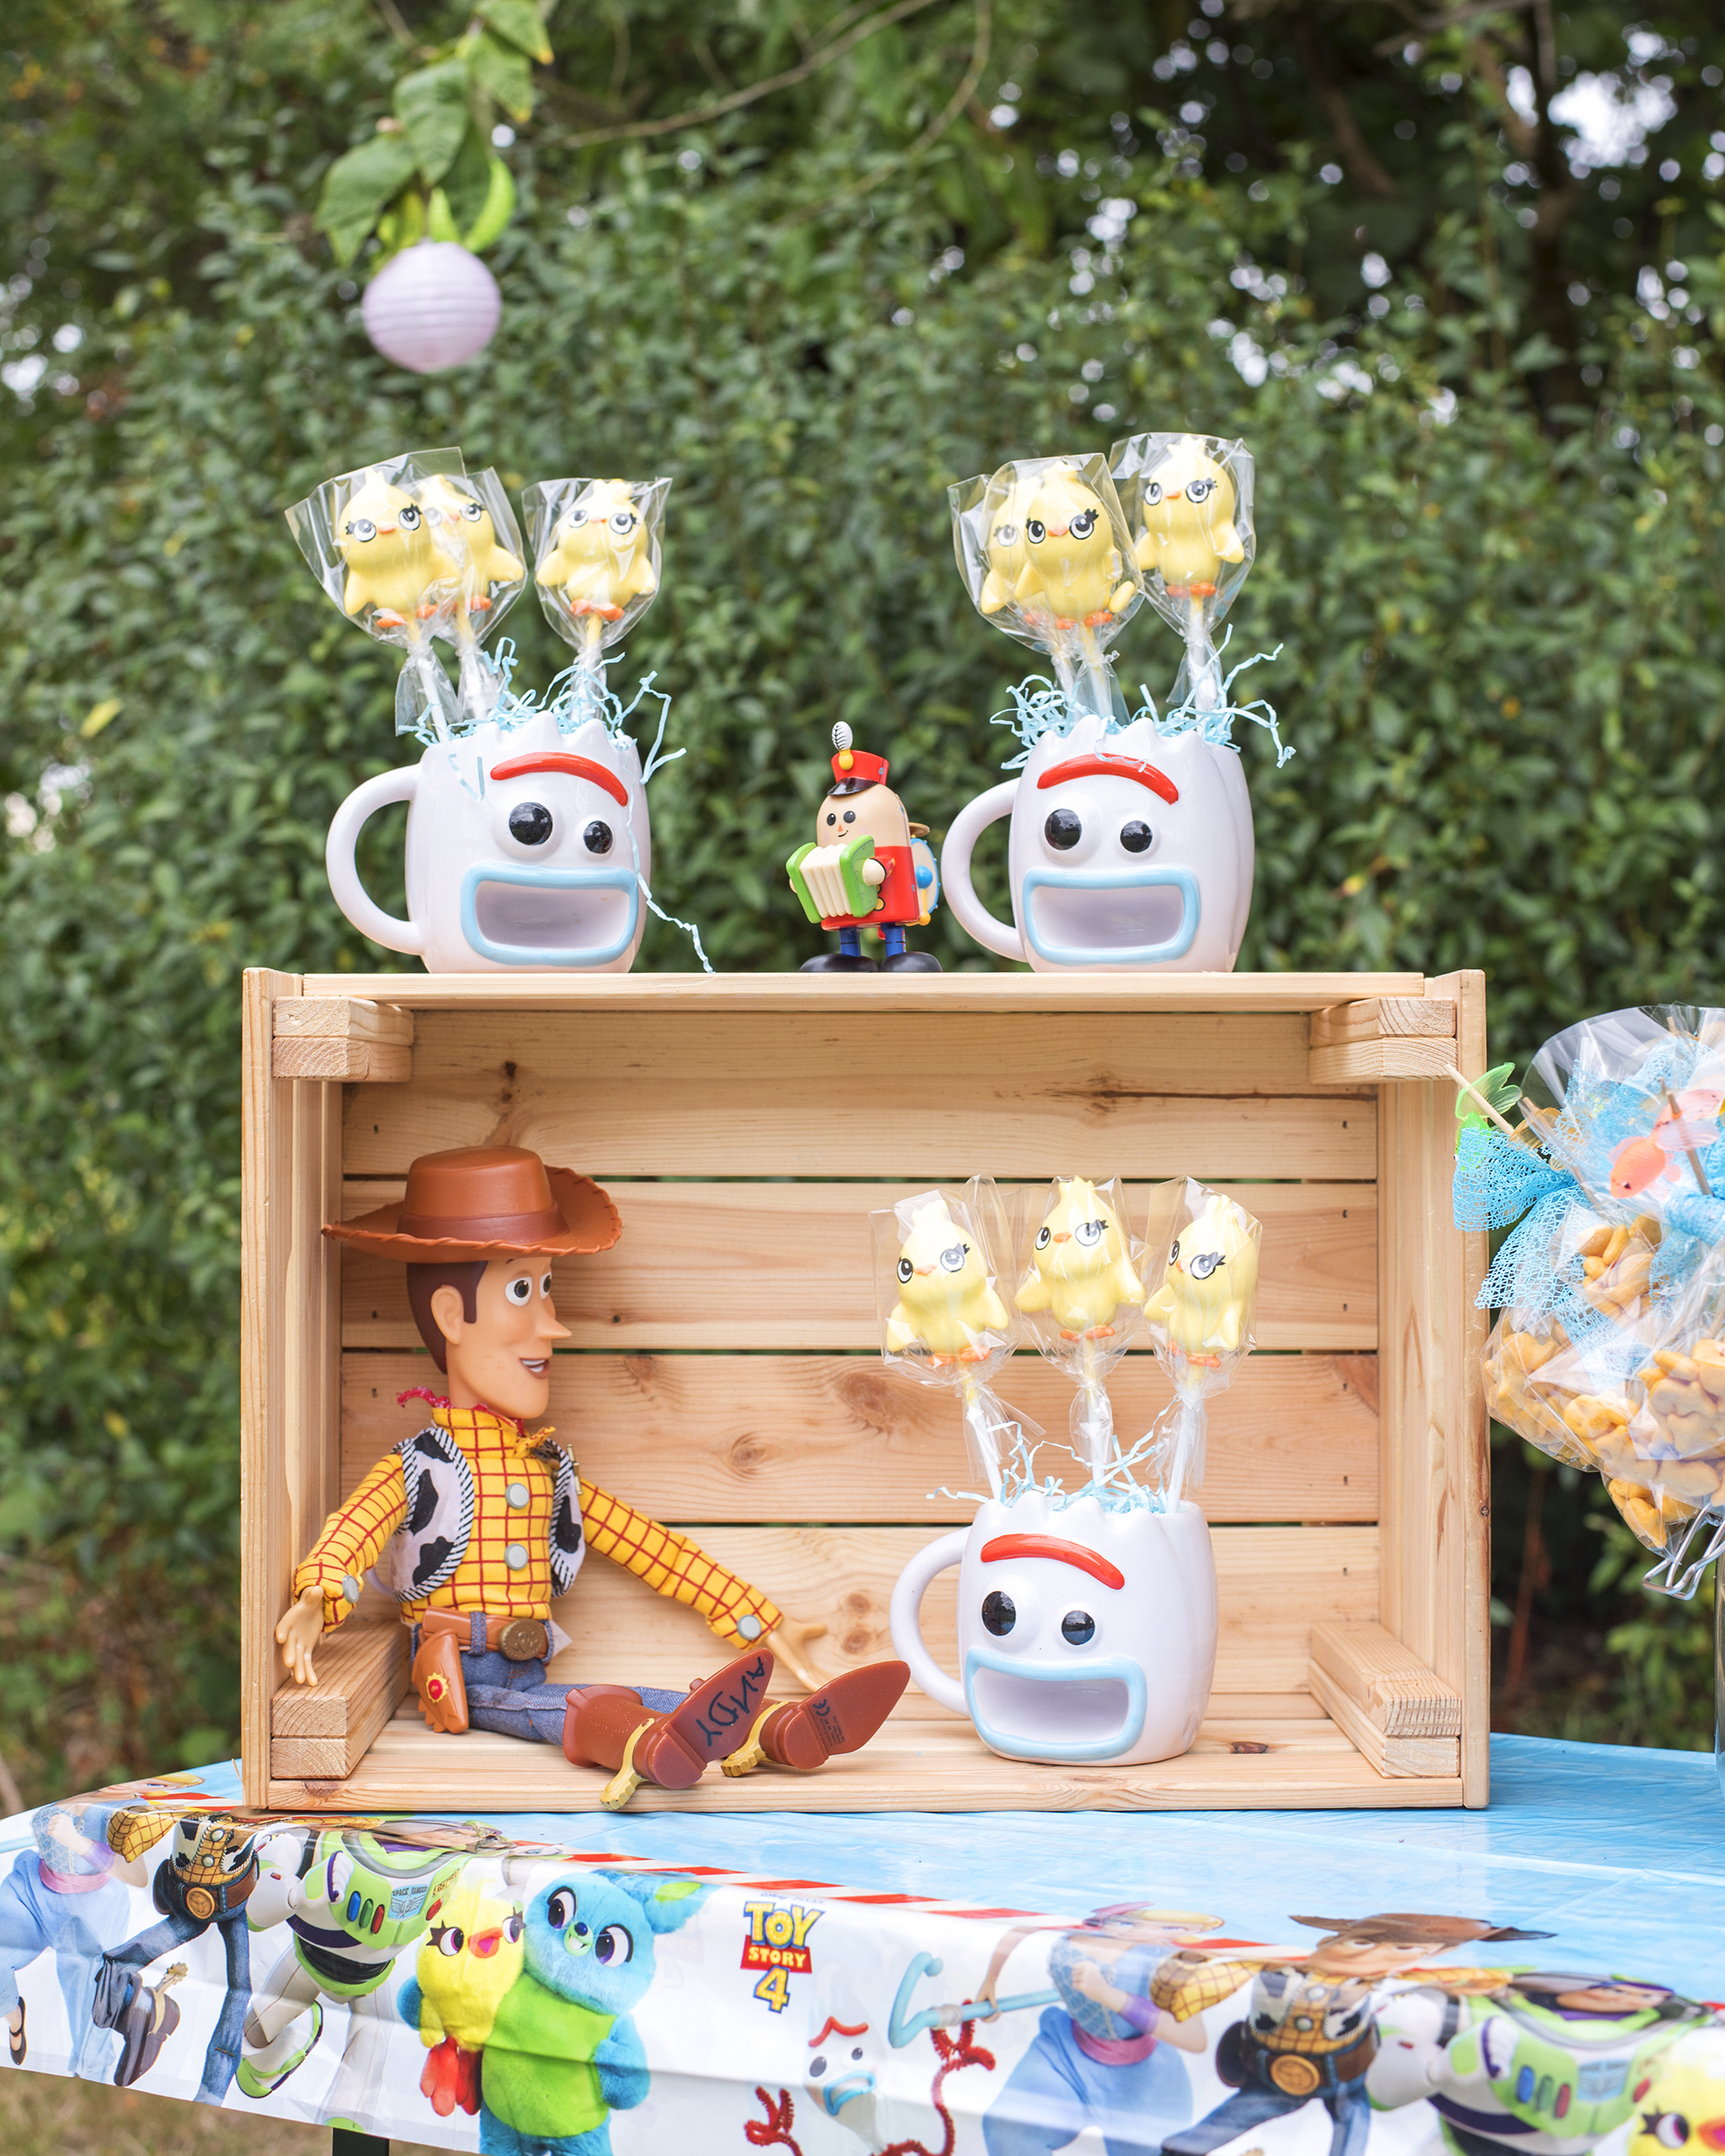 How to Throw a Toy Story Party